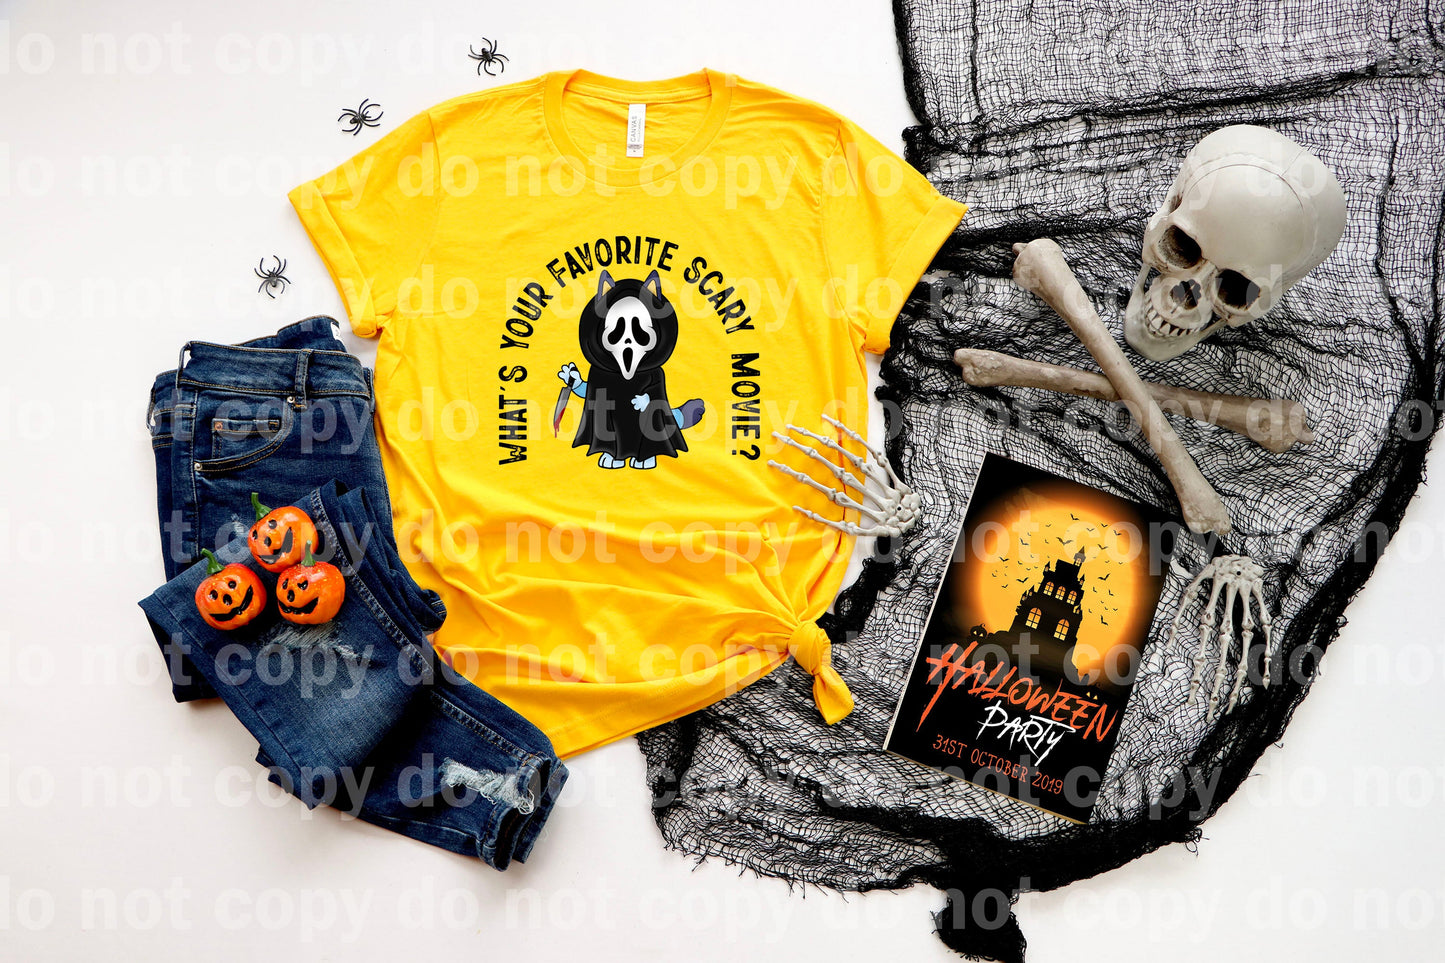 What's Your Favorite Scary Movie Dream Print or Sublimation Print